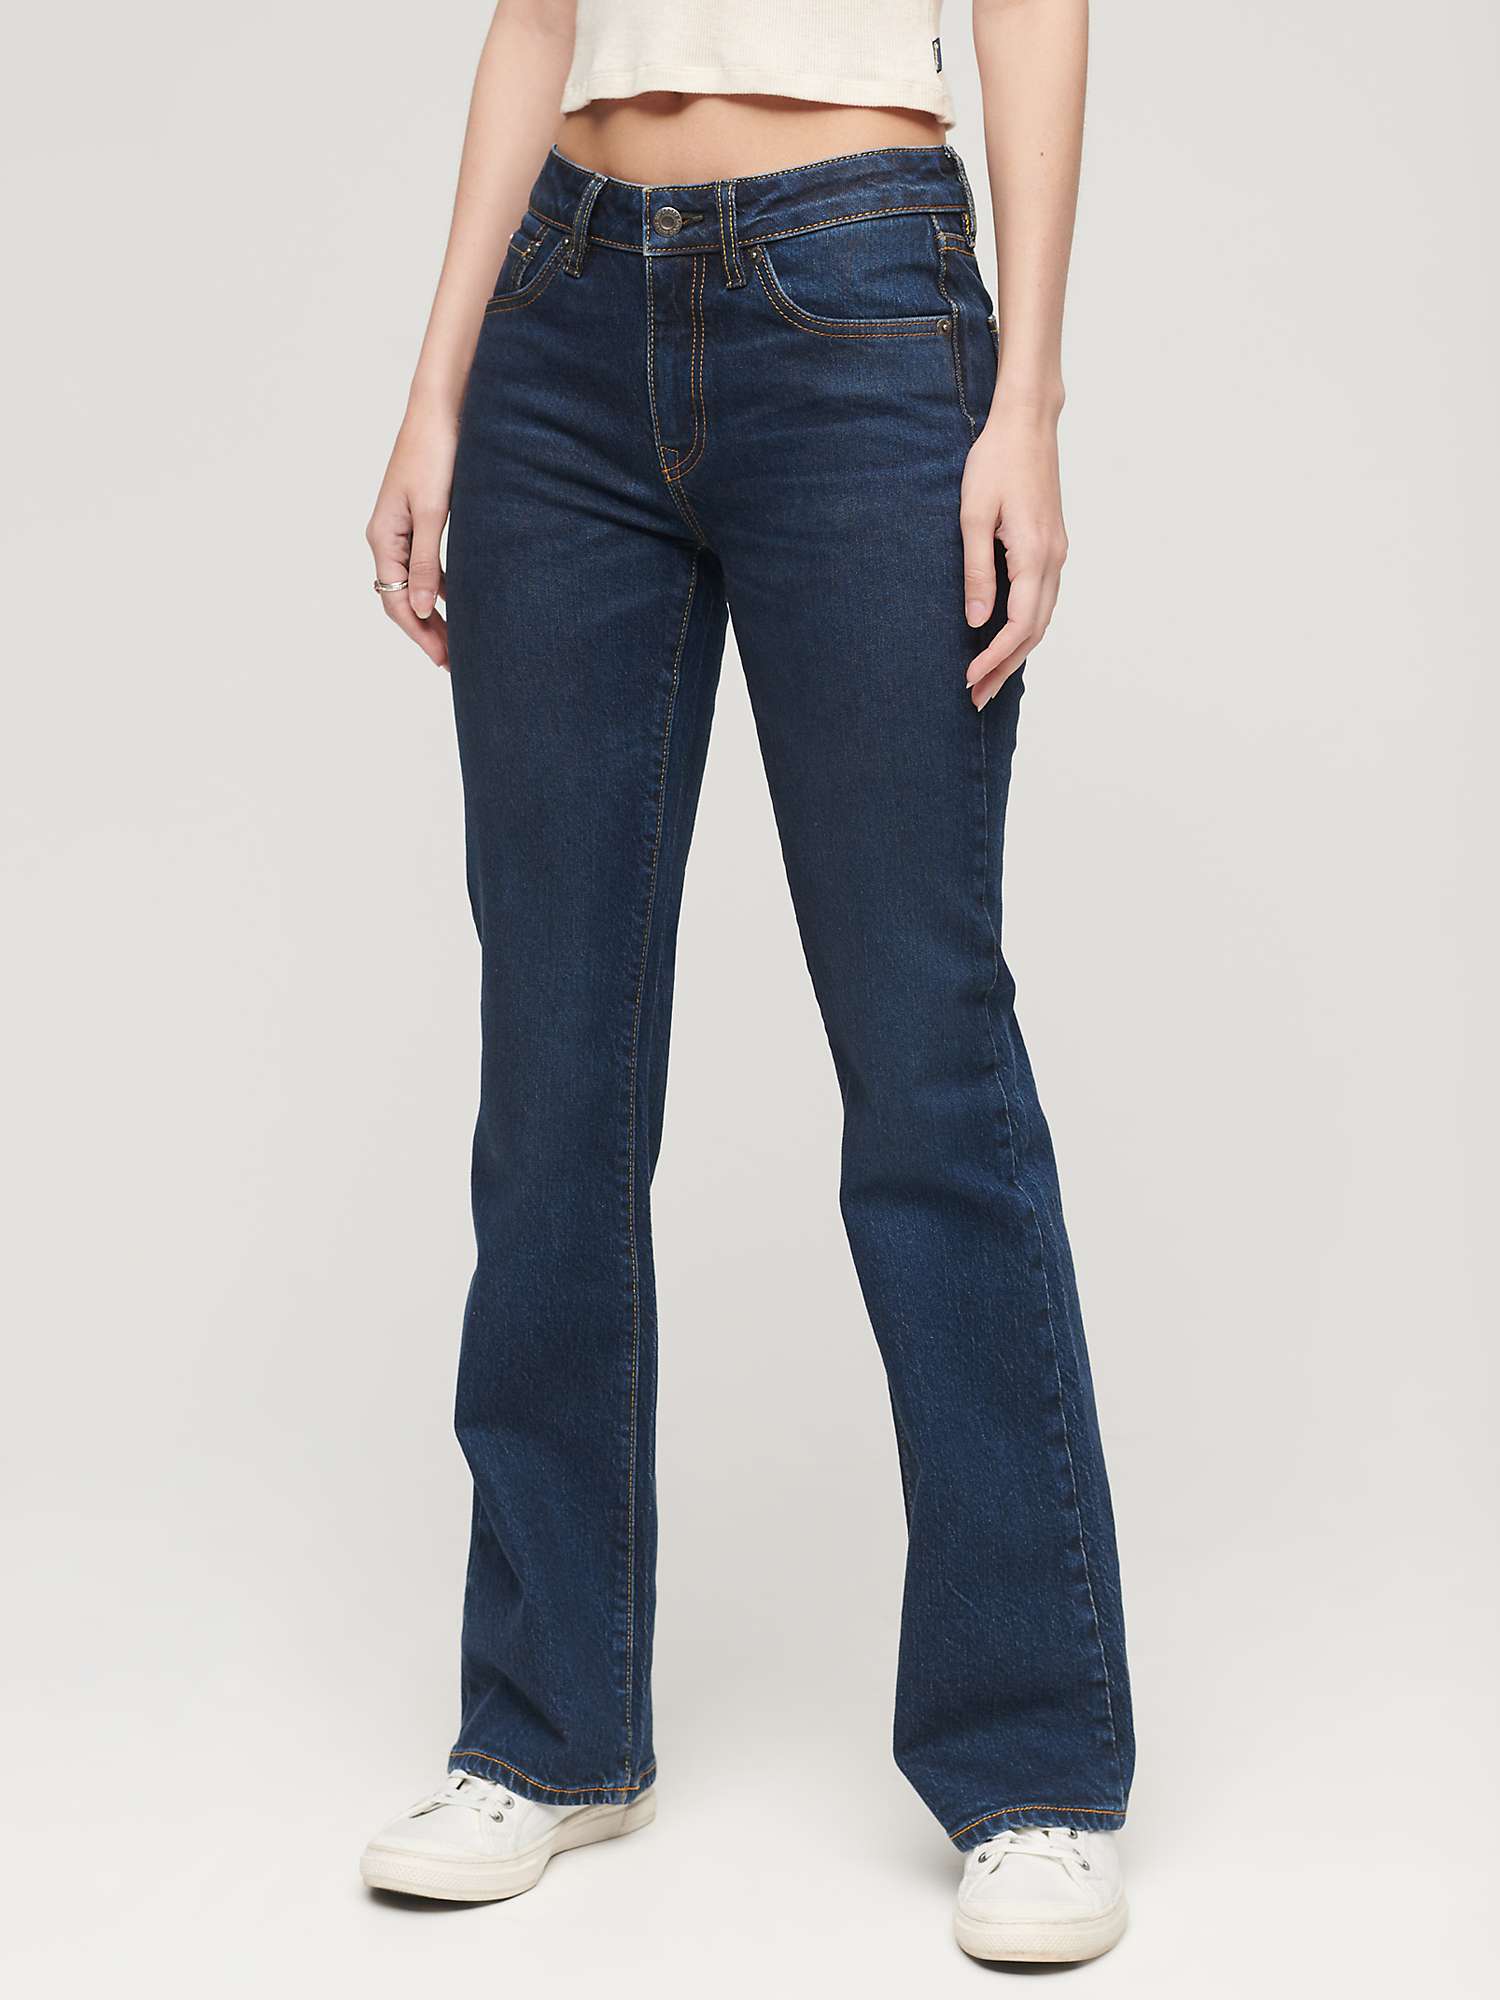 Buy Superdry Organic Cotton Mid Rise Slim Flare Jeans Online at johnlewis.com